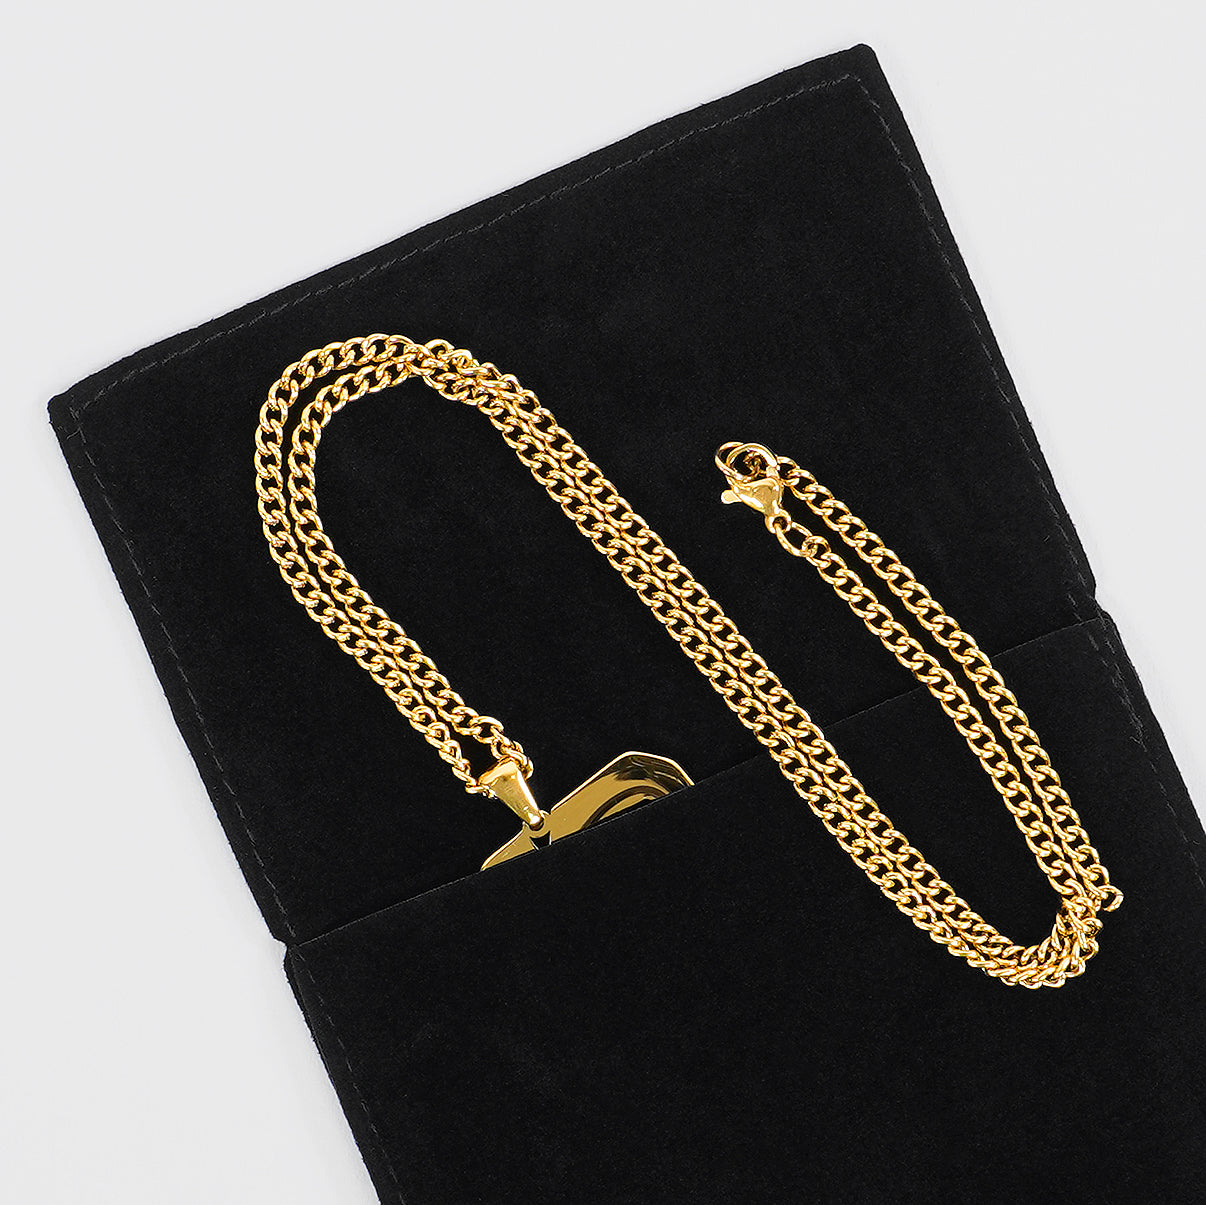 46 Number Pendant with Chain Necklace - Gold Plated Stainless Steel